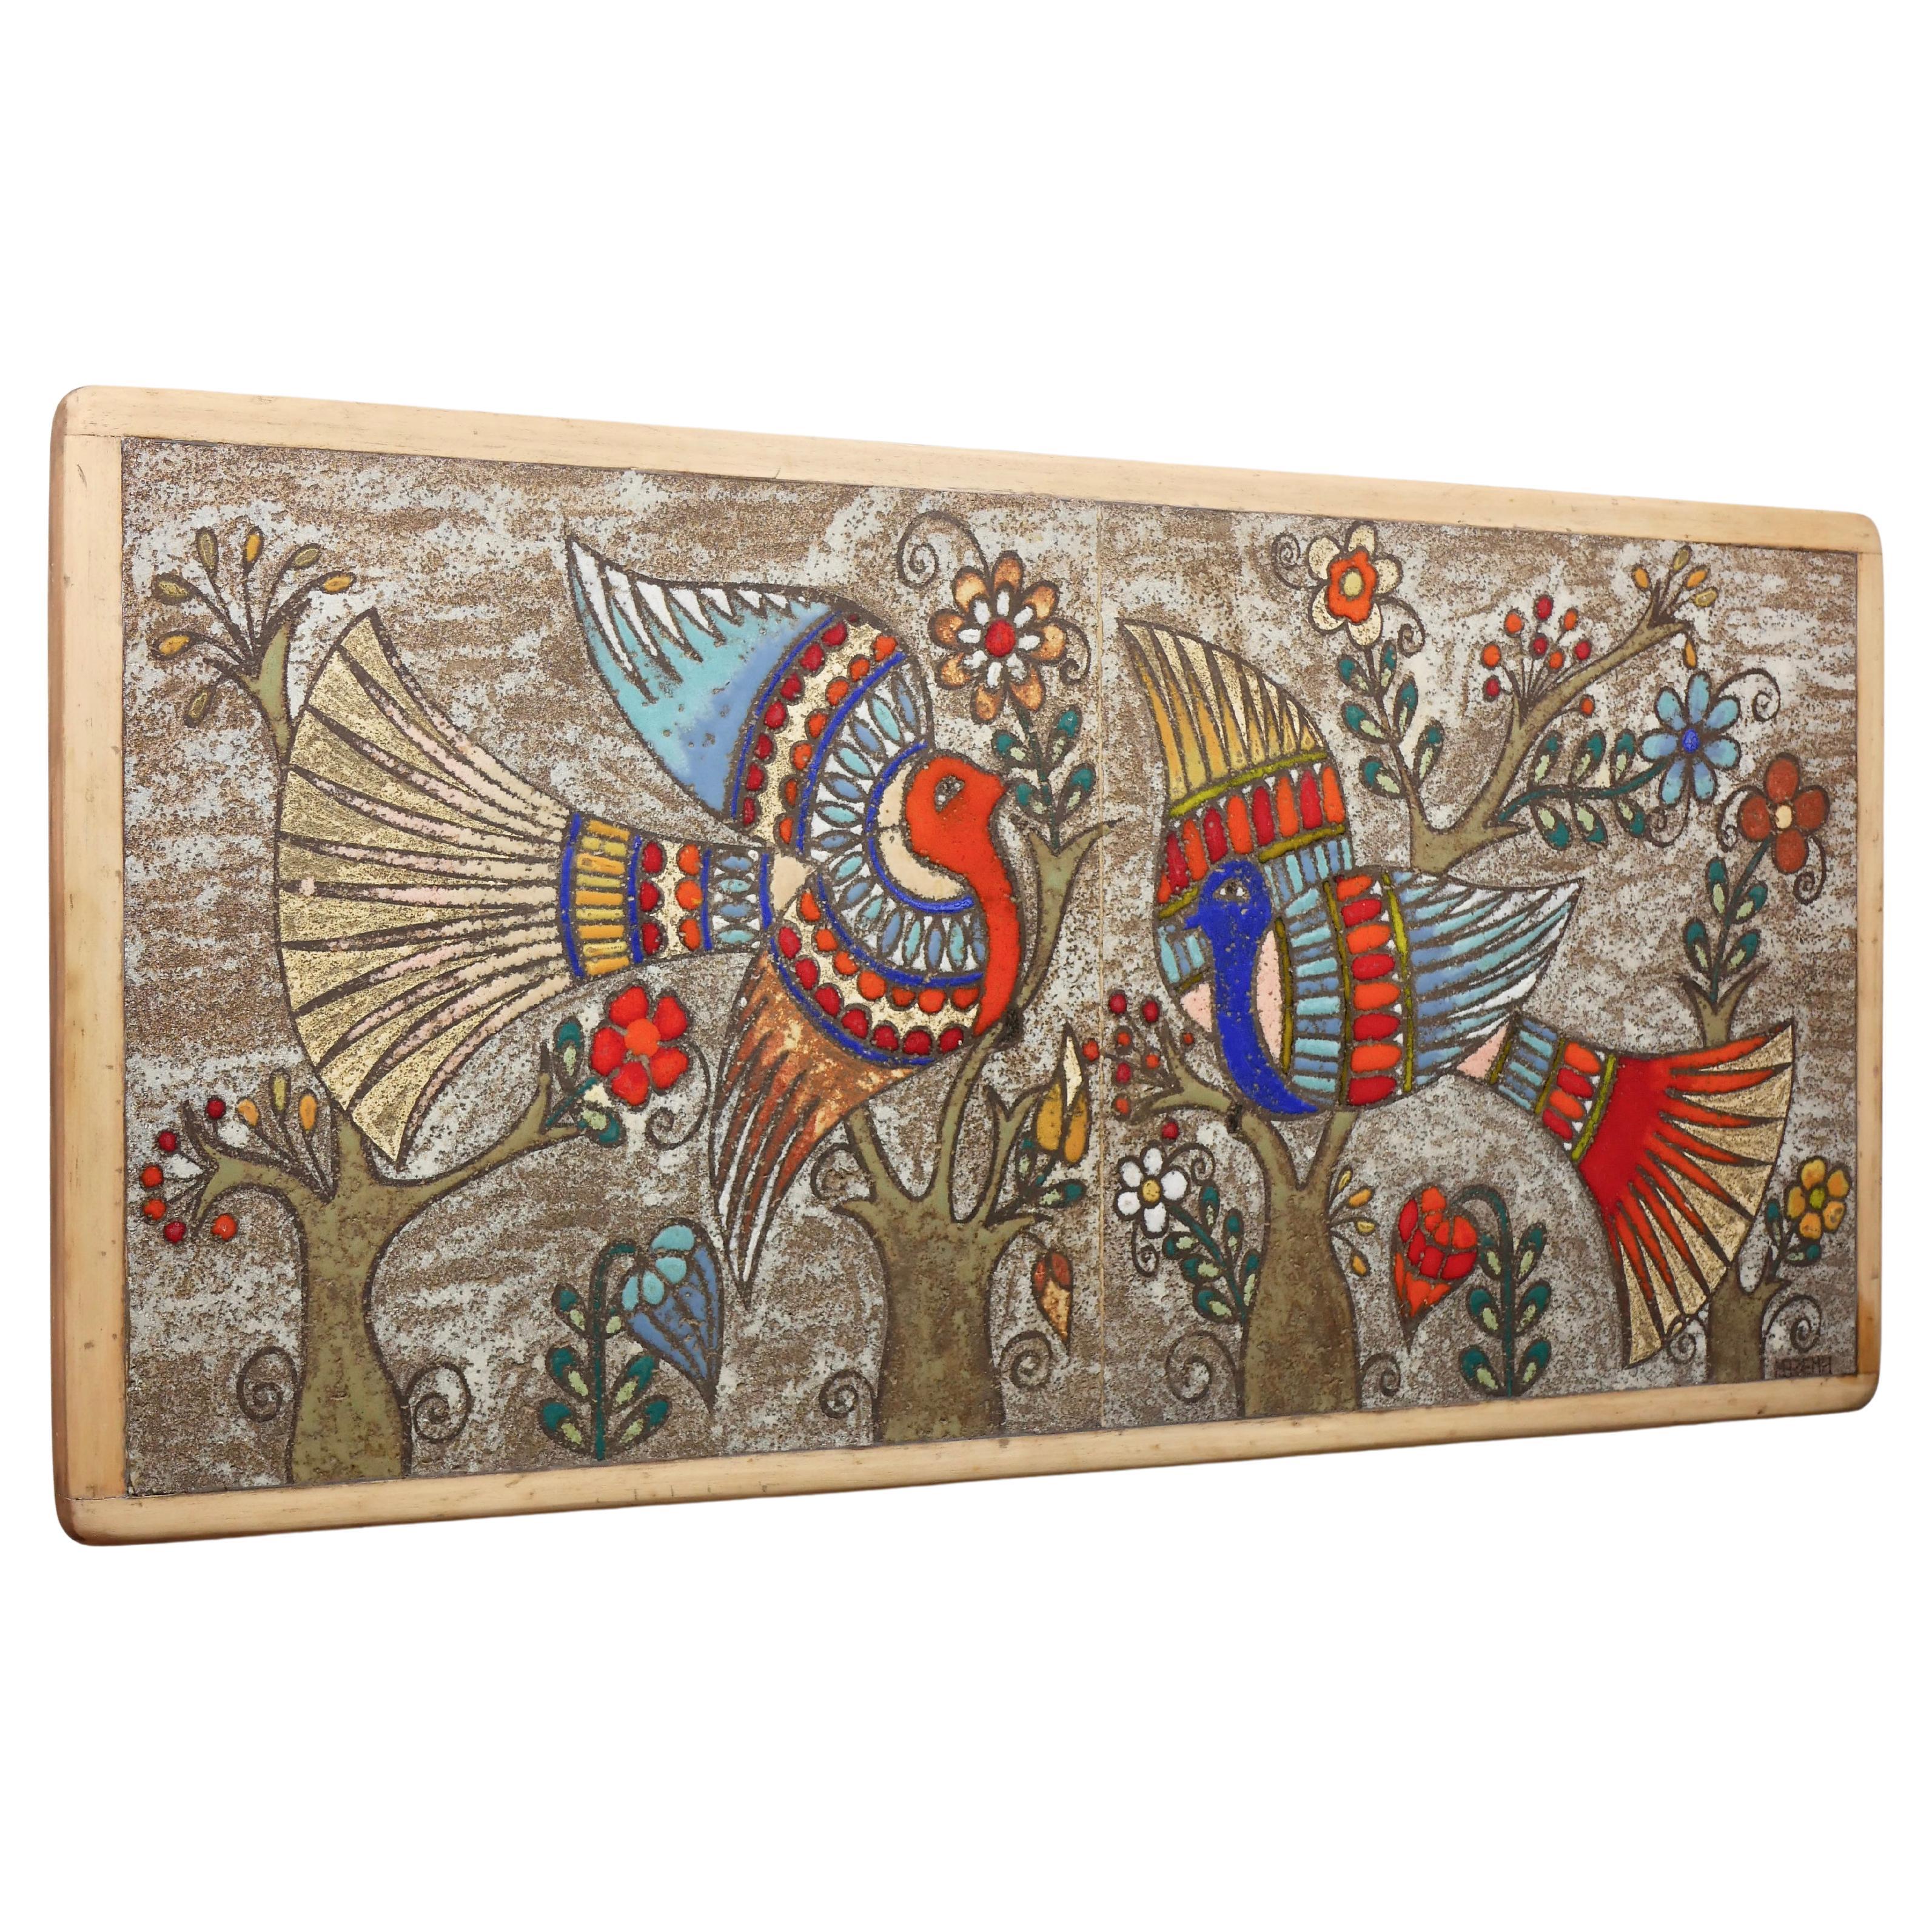 Large Enameled Lava Board, Ceramics by Martine Azéma, Vallauris, France, 1970s